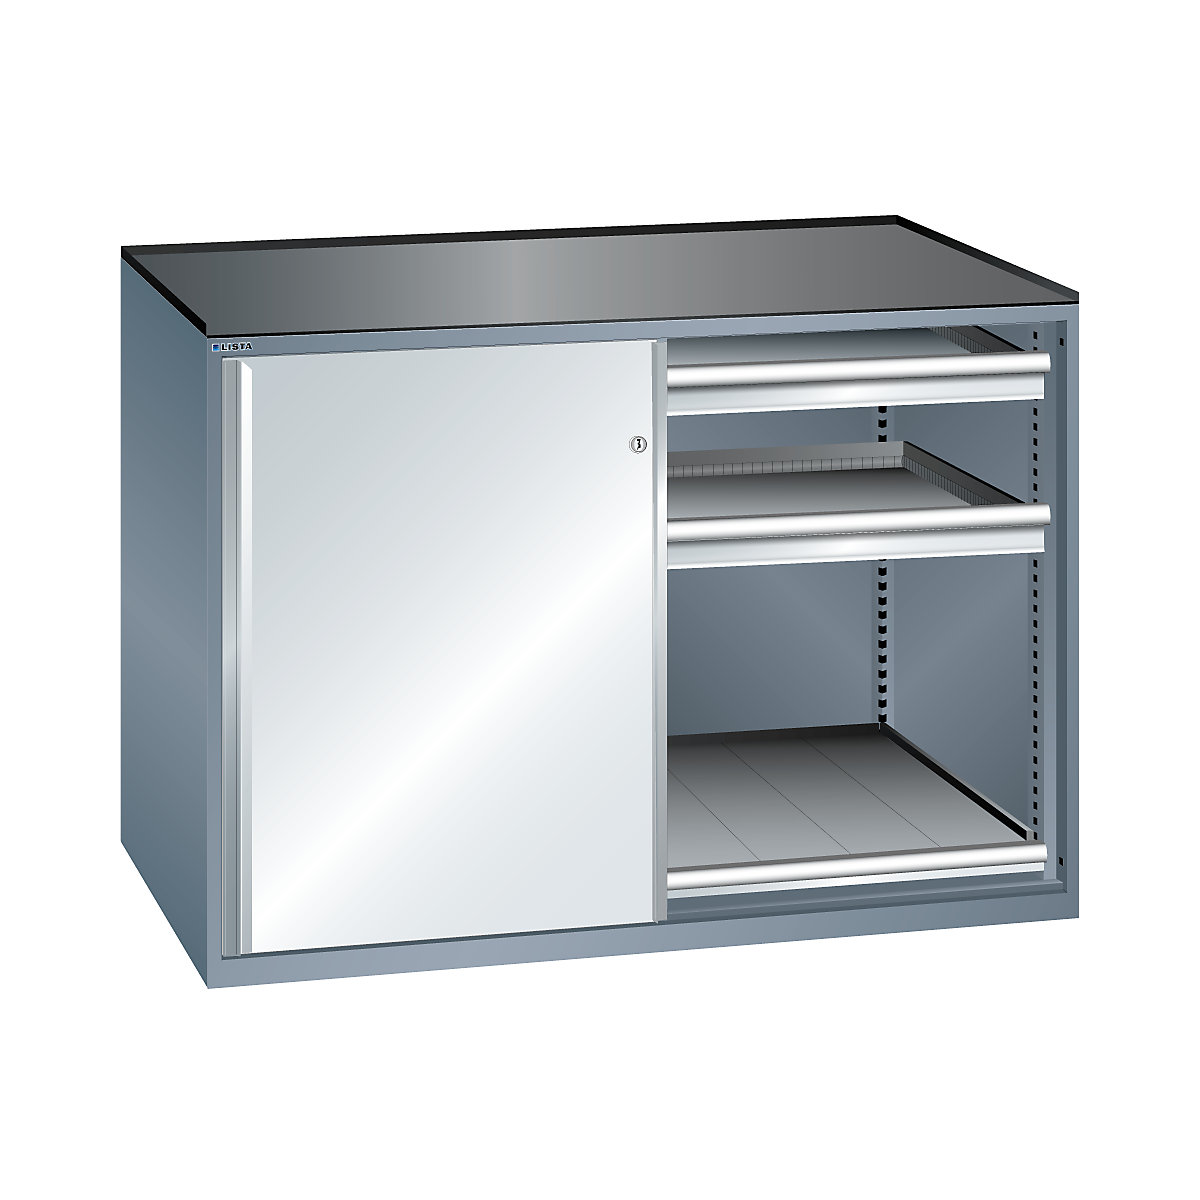 Sliding door cupboard, max. load of pull-out shelf 75 kg – LISTA, 4 drawers, 2 pull-out shelves, grey metallic / light grey-4